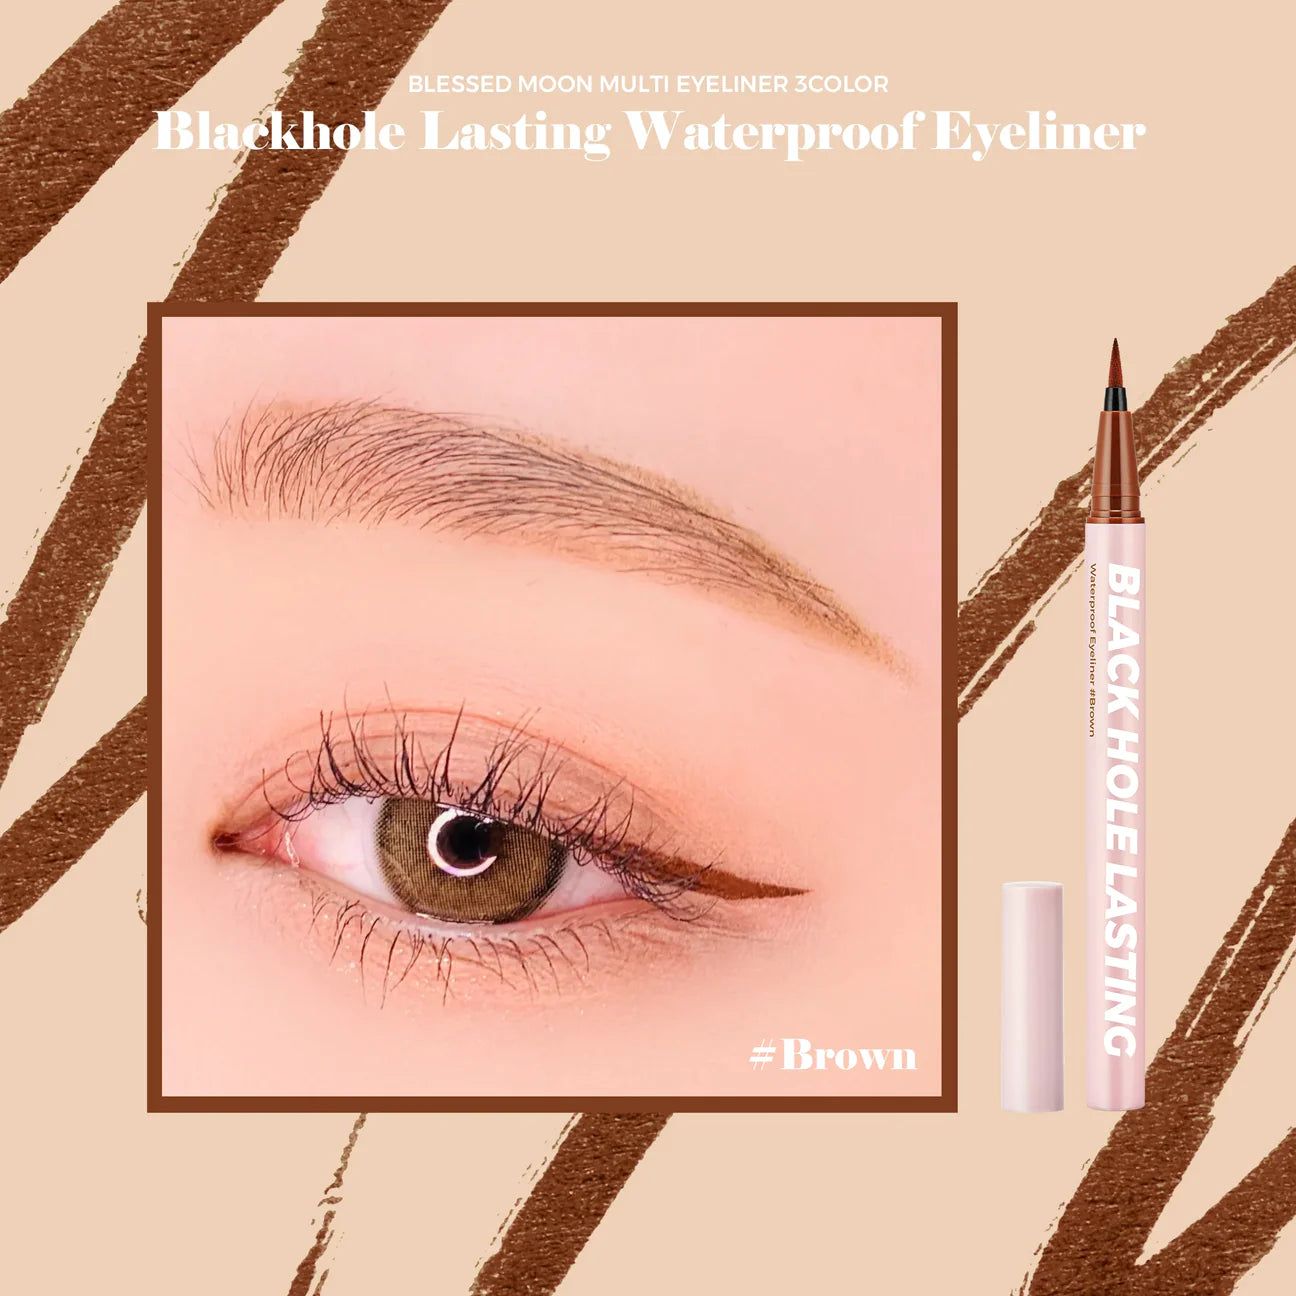 Load image into Gallery viewer, Blessed Moon Black Hole Waterproof Lasting Eyeliner Pen (3 Colours)
